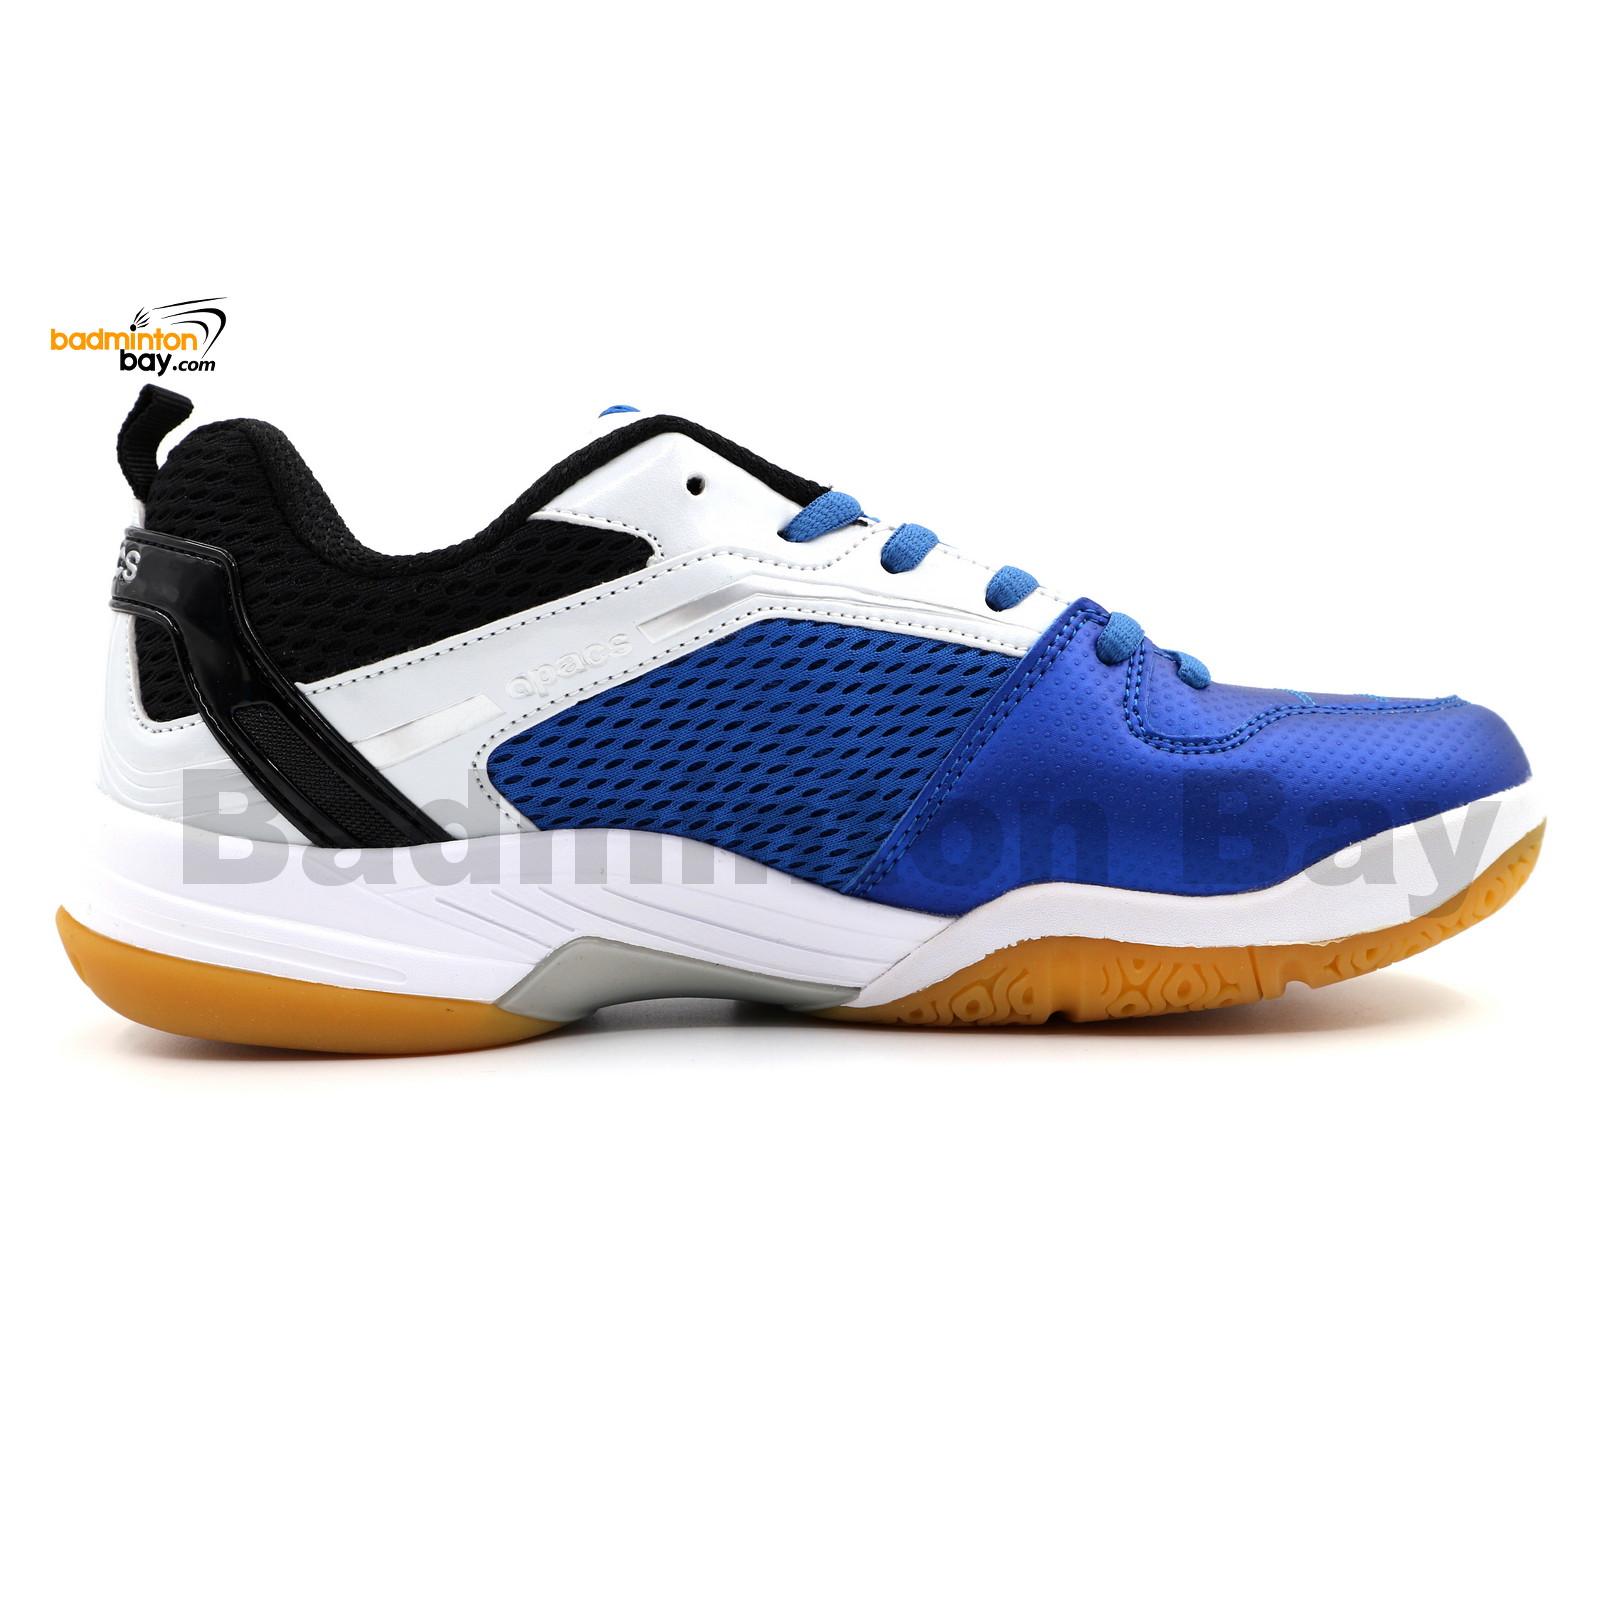 Apacs Cushion Power 082 Blue White Badminton Shoes With Improved ...